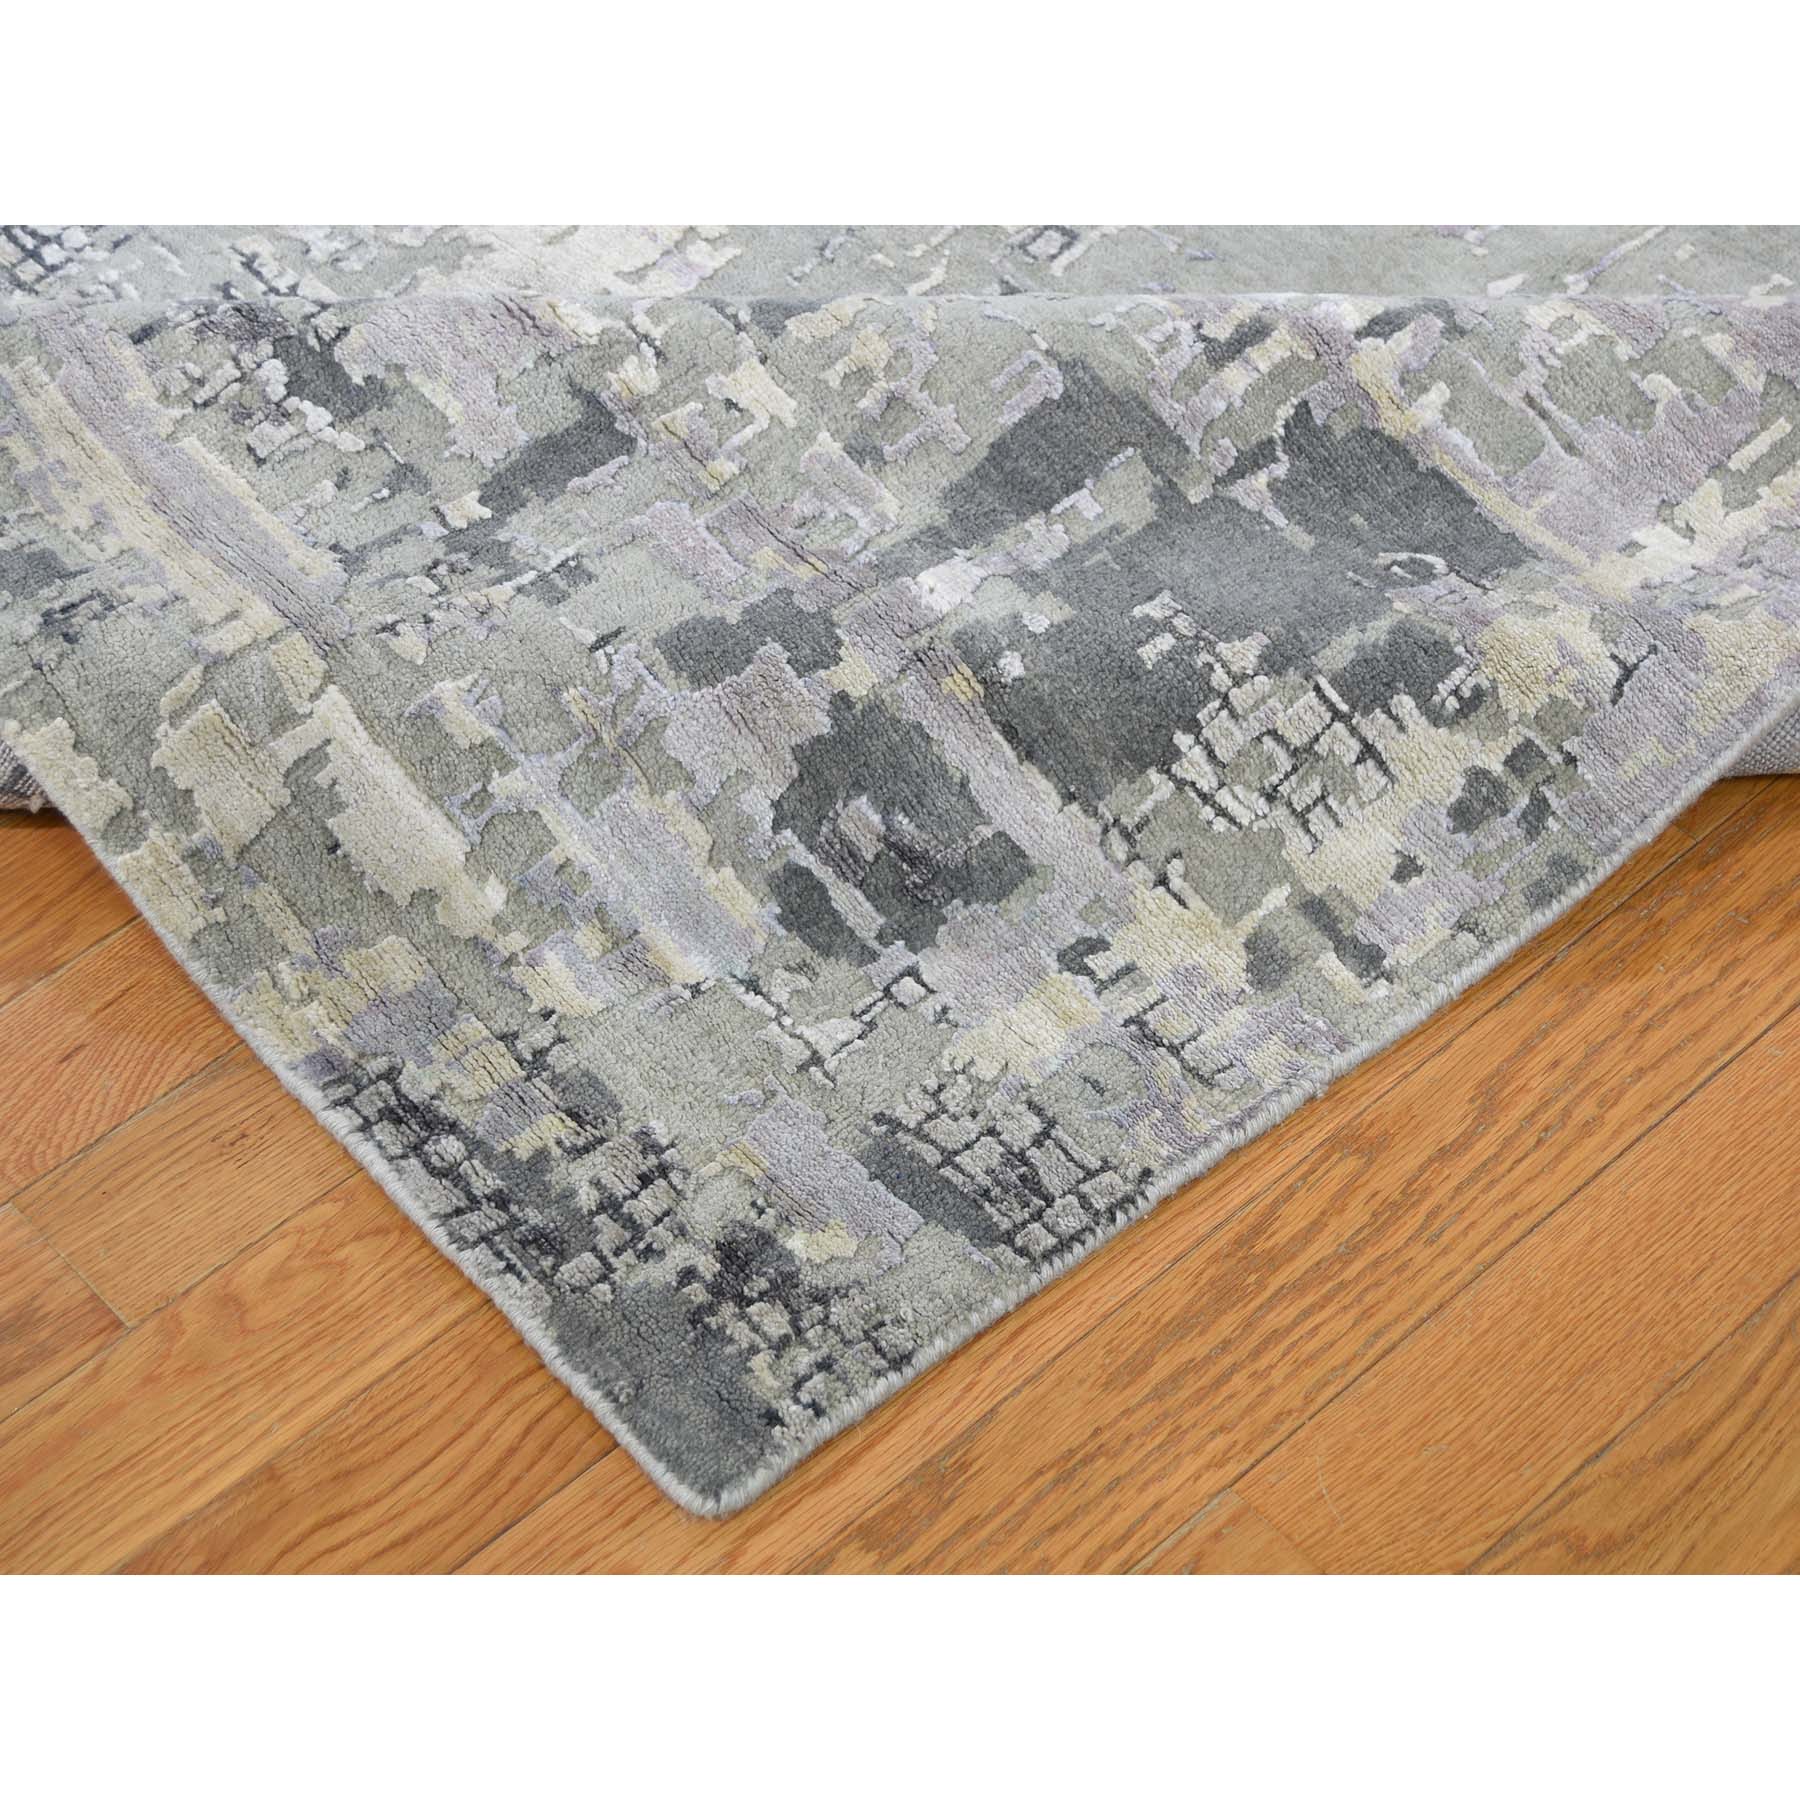 10-x13-9  Abstract Wool And Silk With Mosaic Design Hand-Knotted Modern Rug 